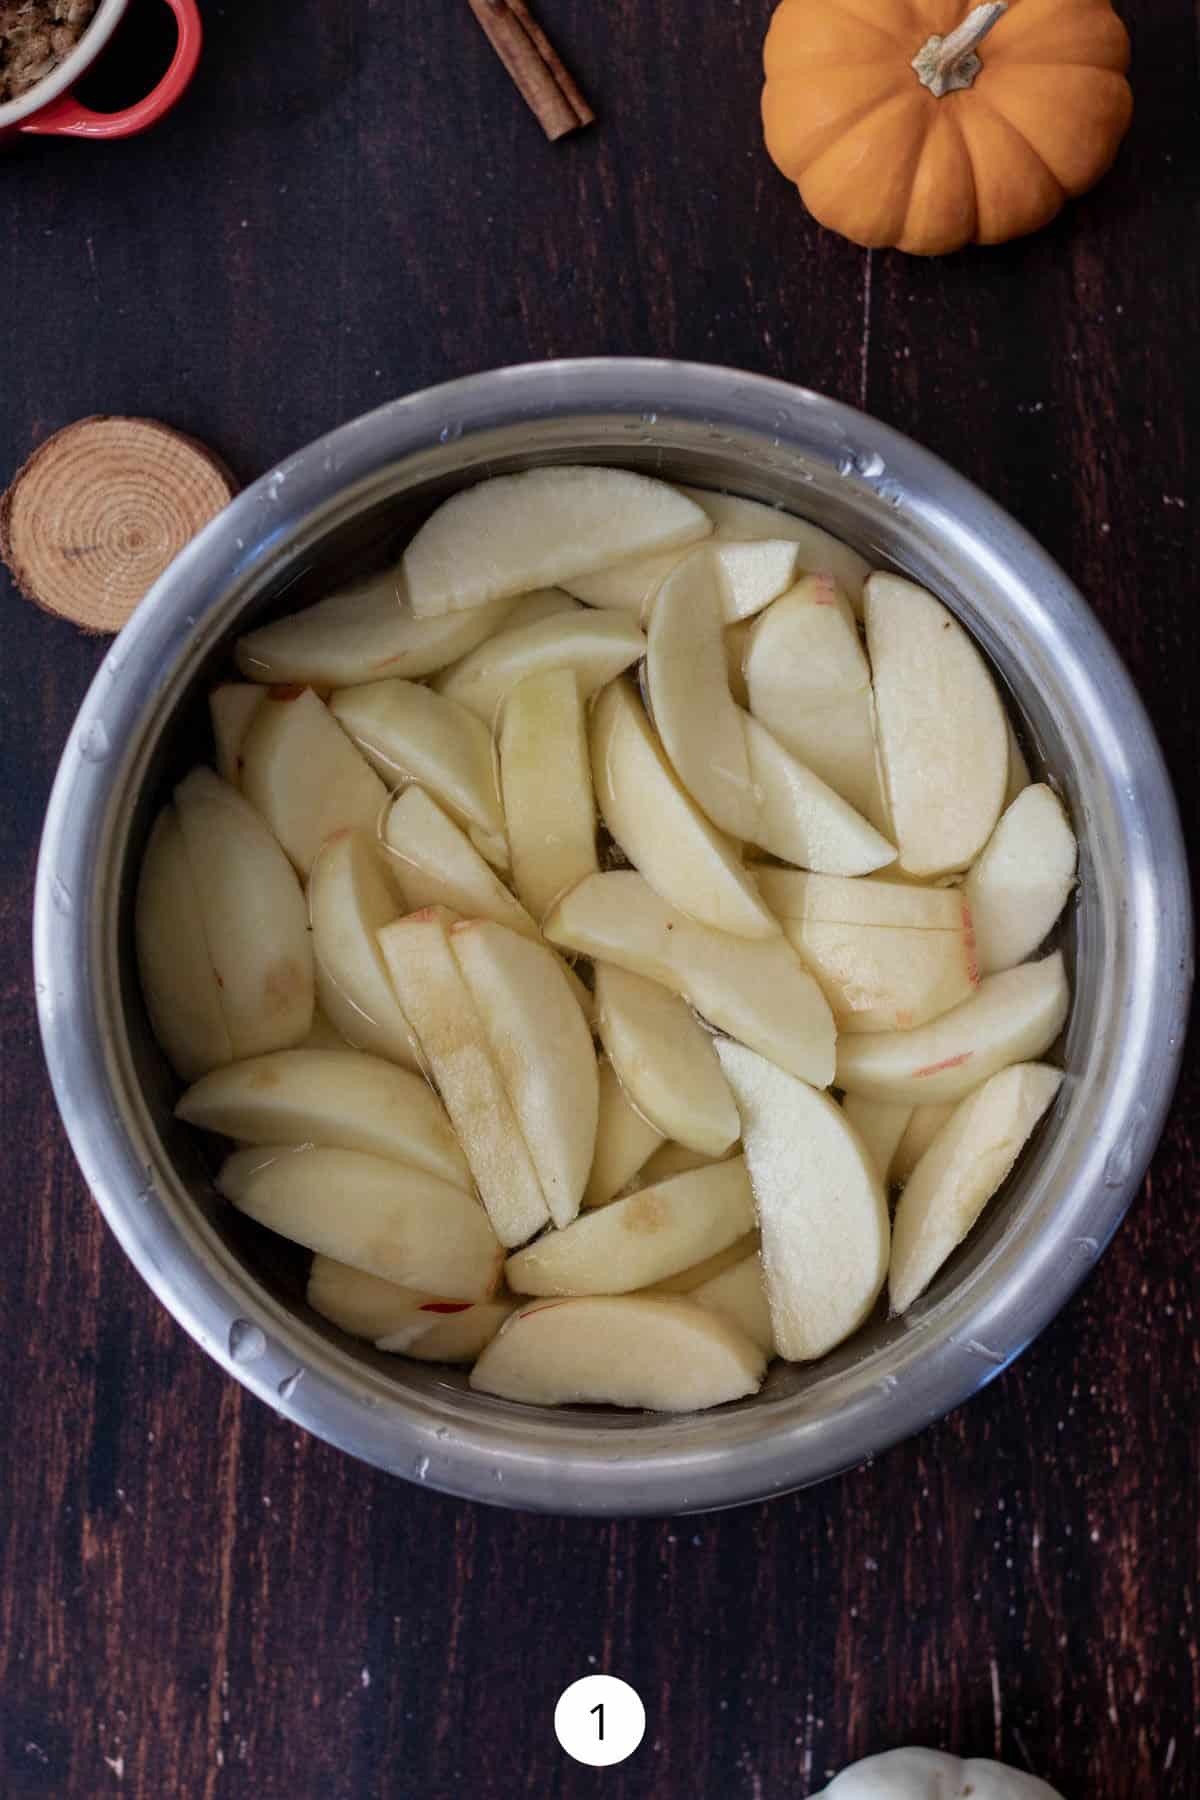 Peeled and sliced apples in a small stainless-steel mixing bowl.